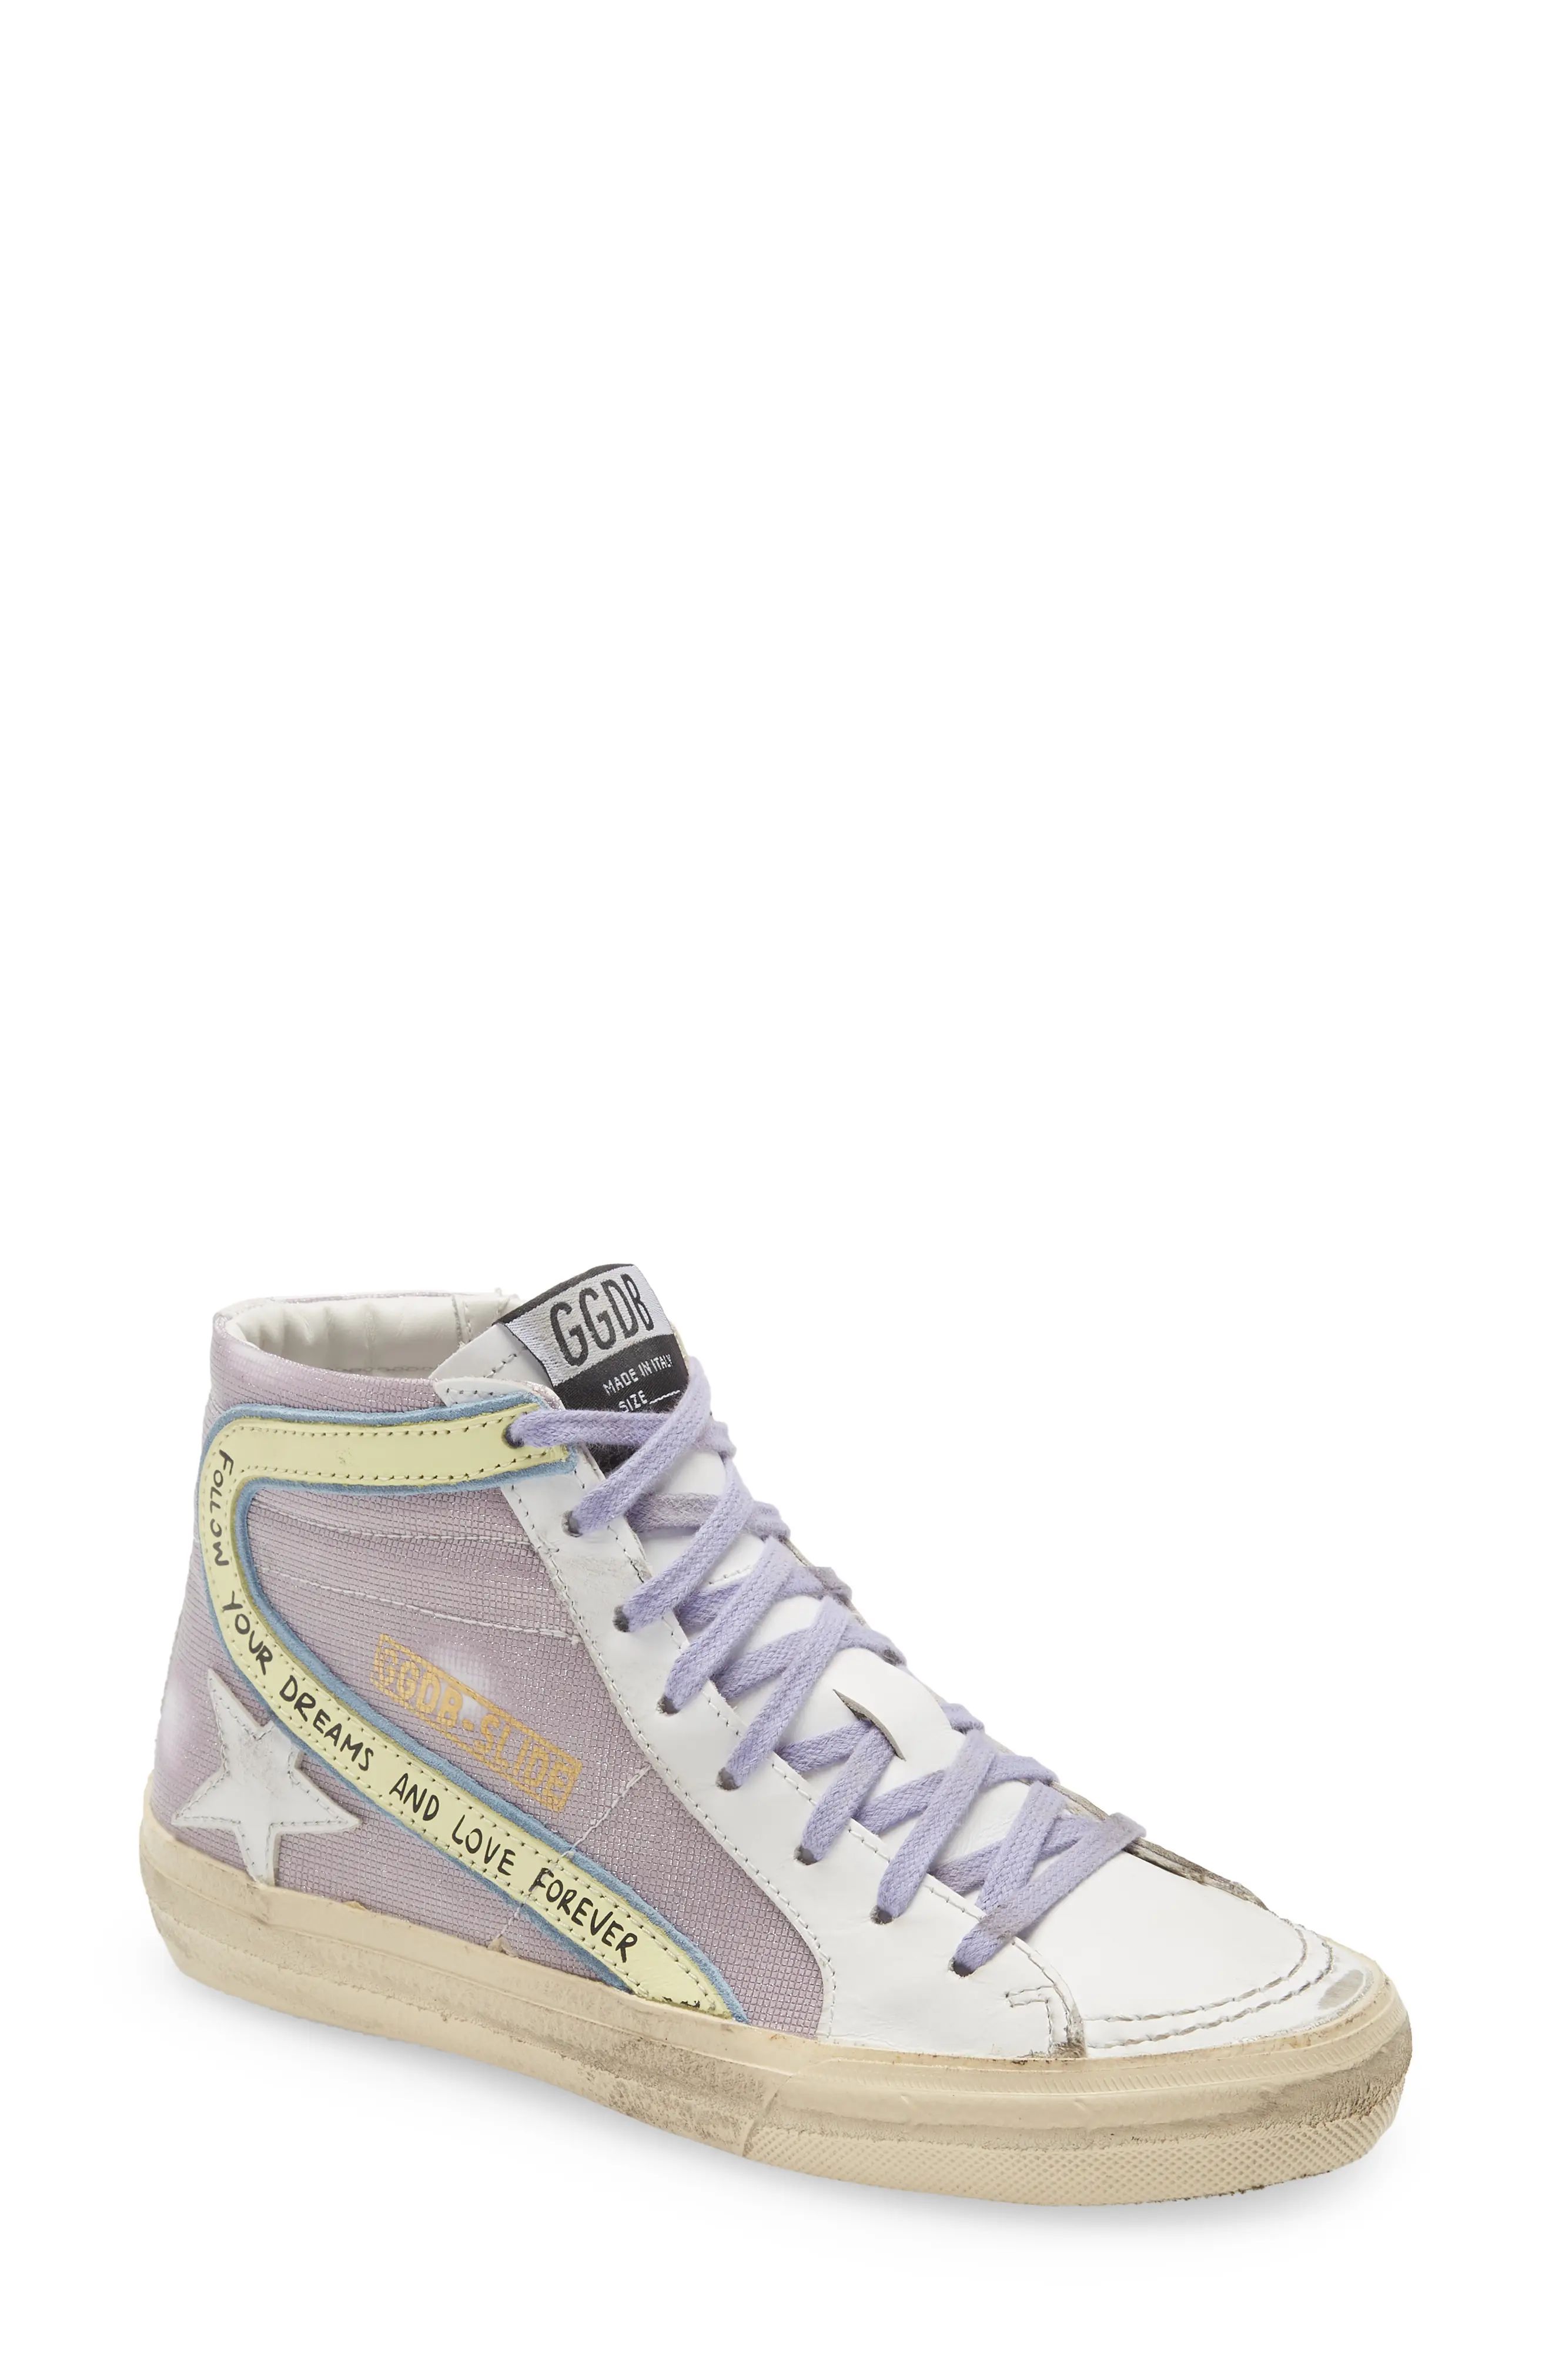 Golden Goose Slide High Top Sneaker in Pink/White/Yellow/Blue at Nordstrom, Size 9Us | Nordstrom